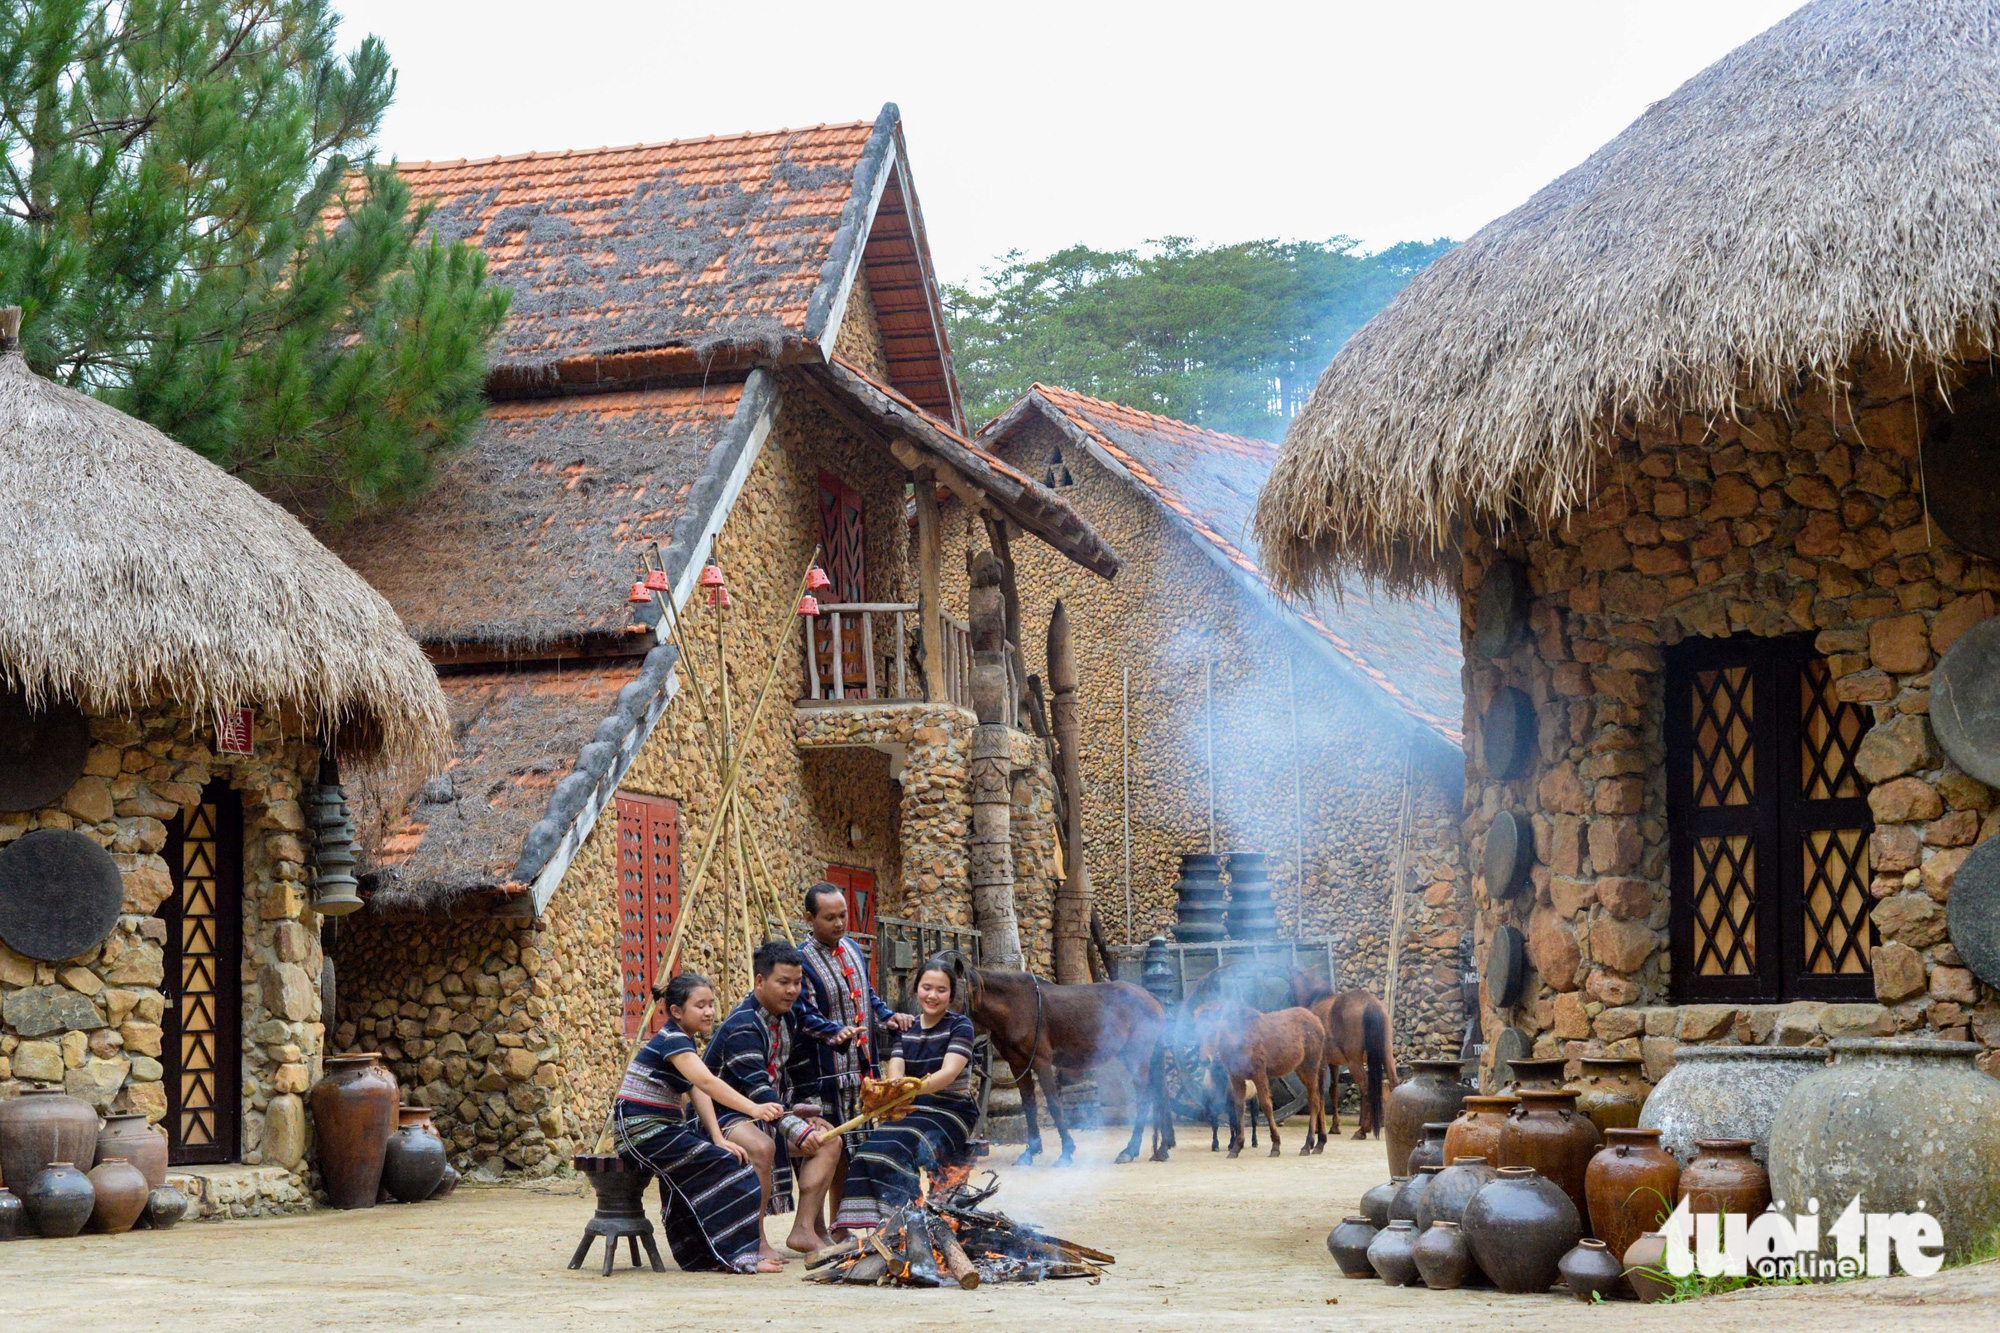 Lac Duong District has serious tourism potential as it preserves the indigenous cultural space of the K'Ho ethnic minority group. Photo: The Kiet / Tuoi Tre